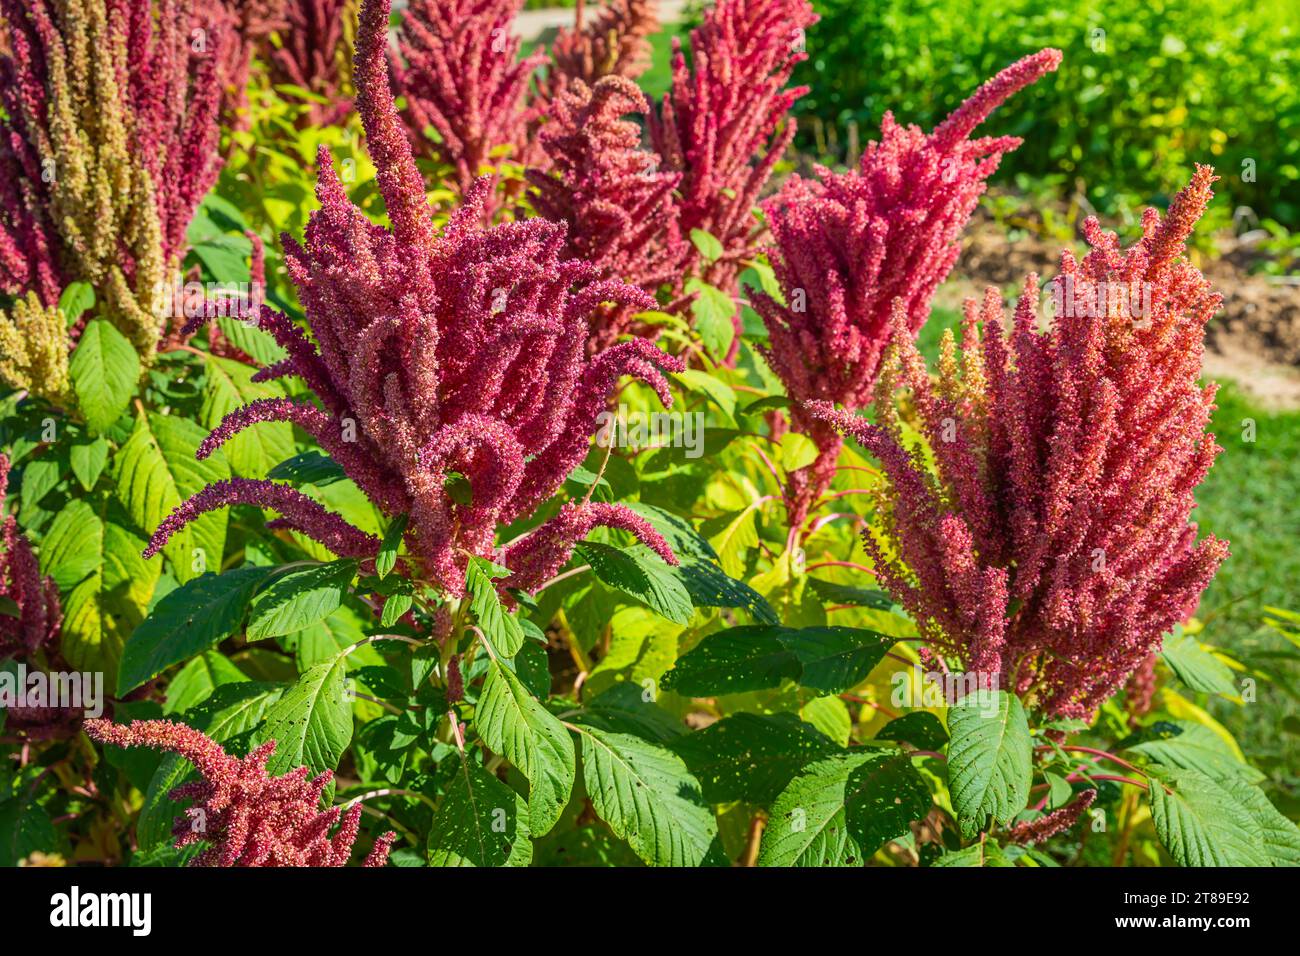 Blooming  Indian red amaranth plant growing in summer garden. Leaf vegetable, cereal and ornamental plant, source of proteins and amino acids, glutenf Stock Photo